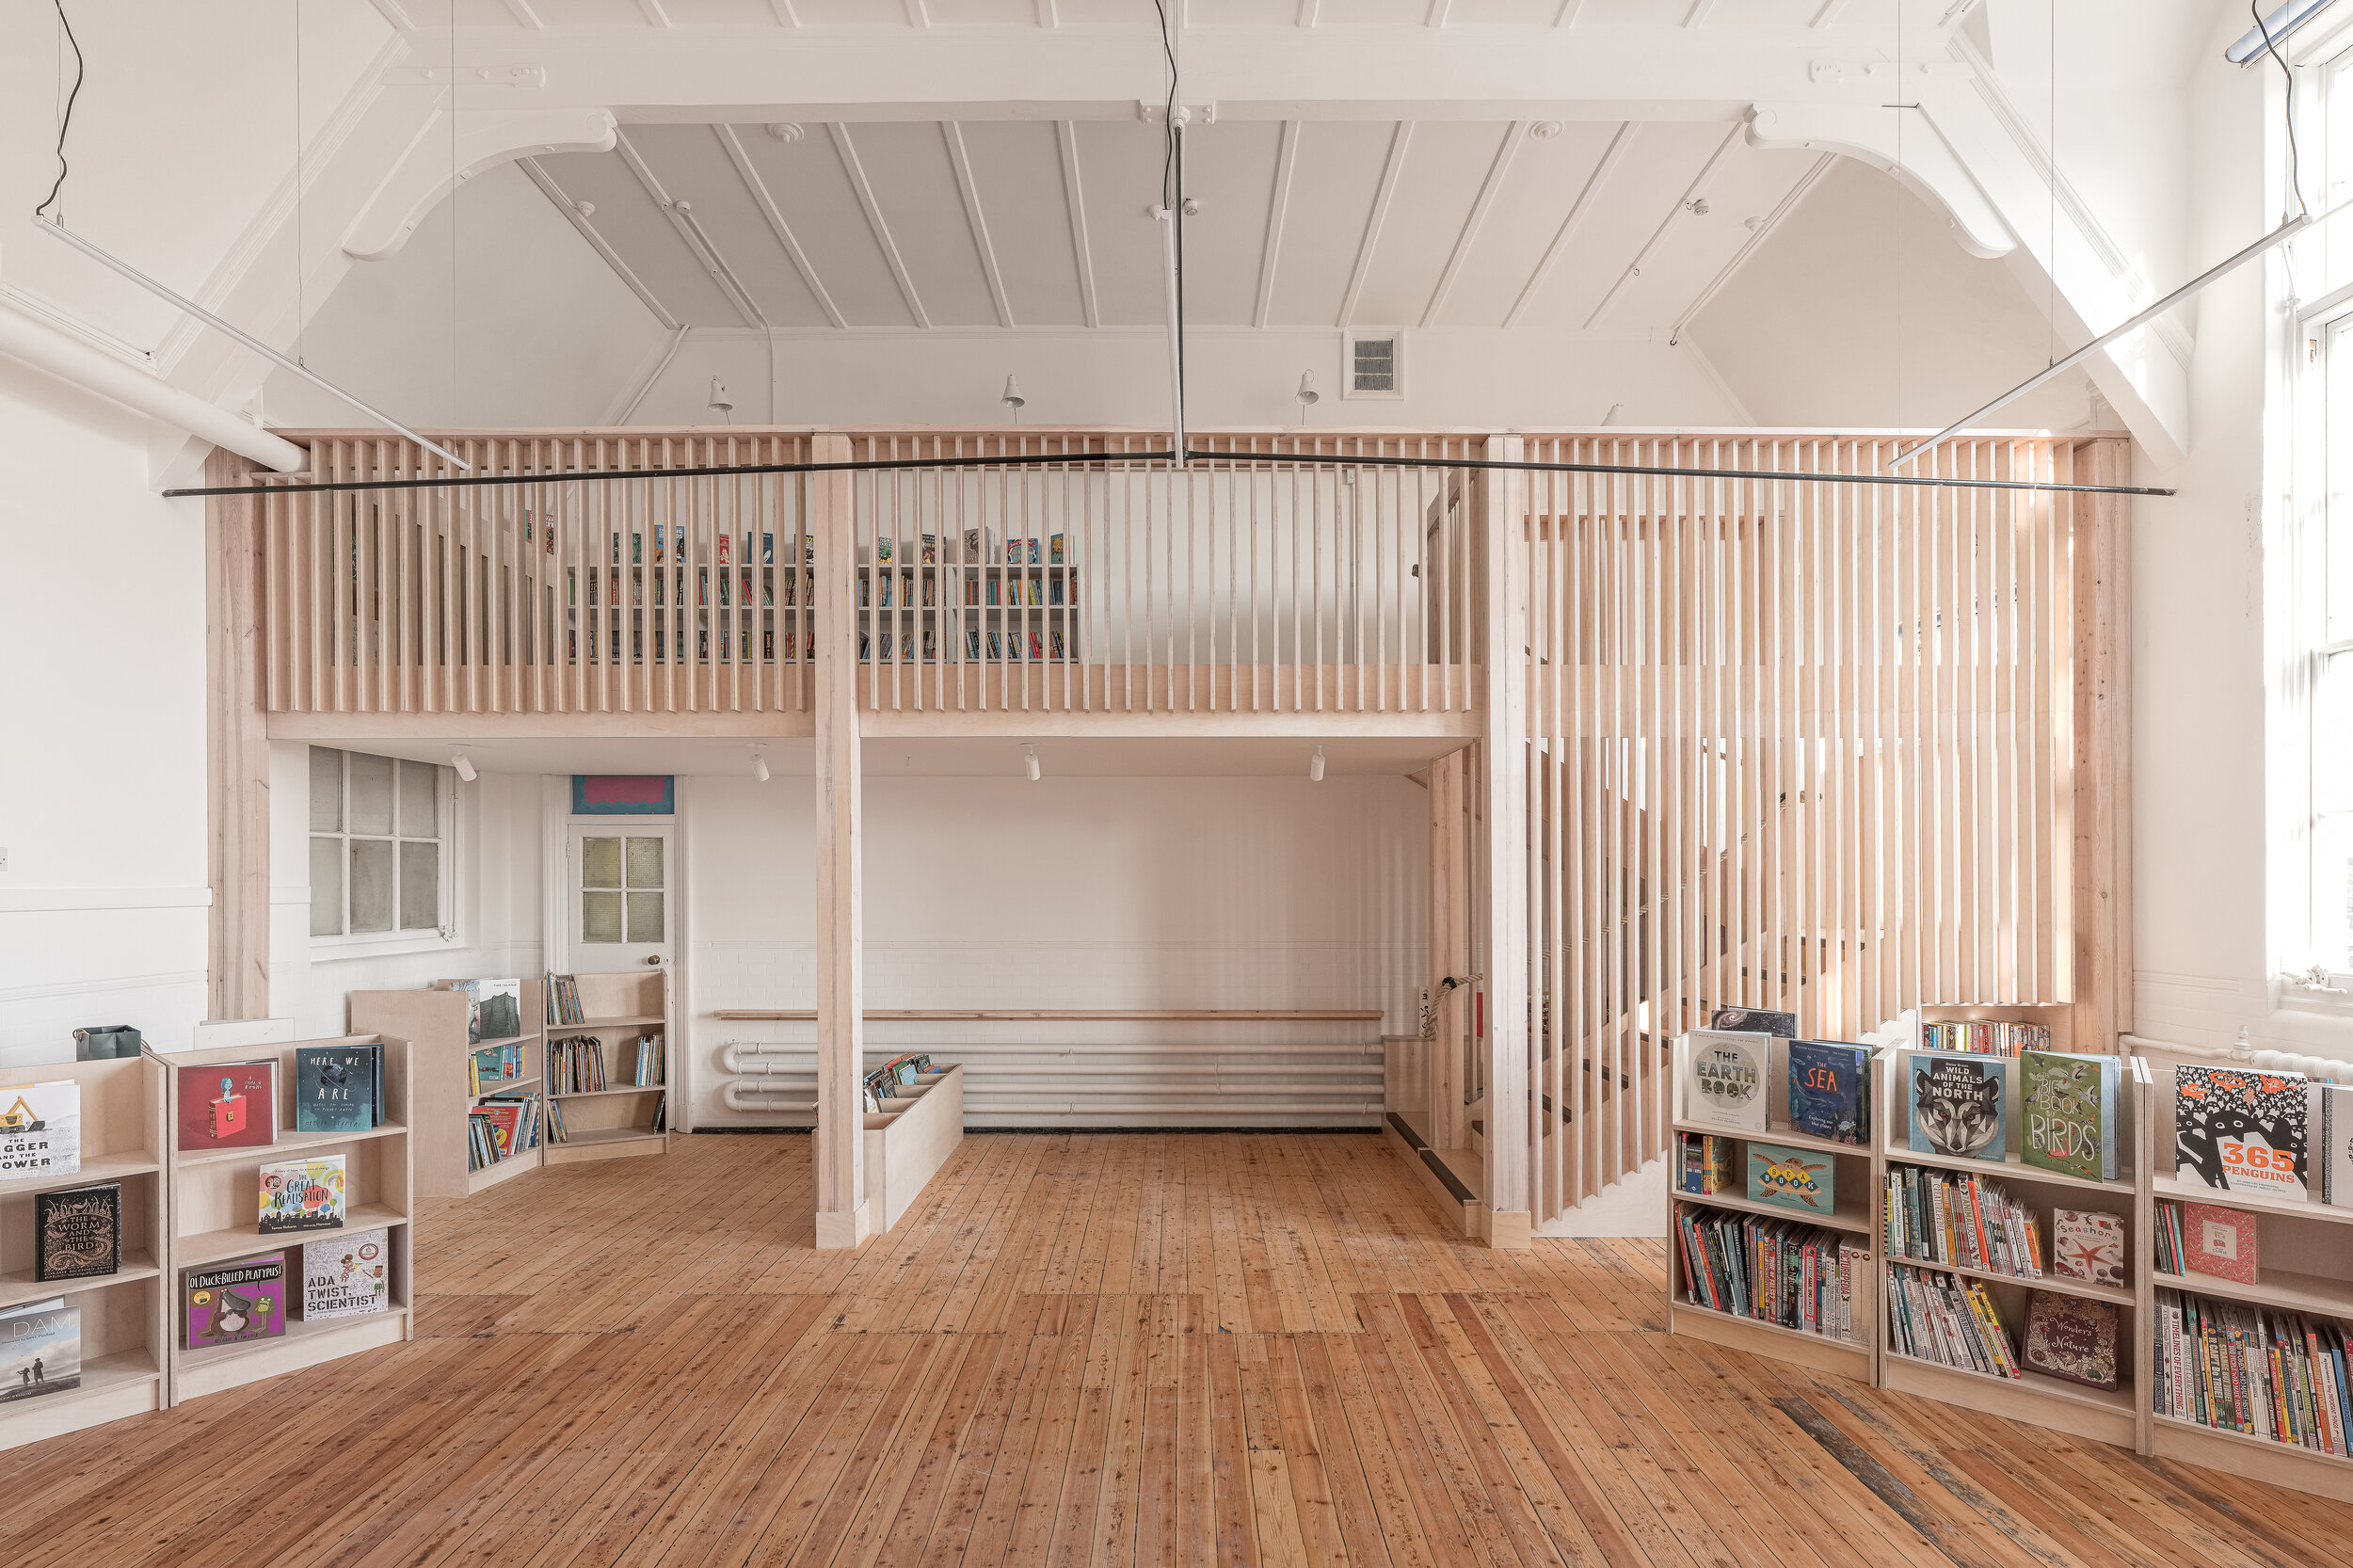 Fred+Howarth+Photography_Ivydale+Library_01.jpg